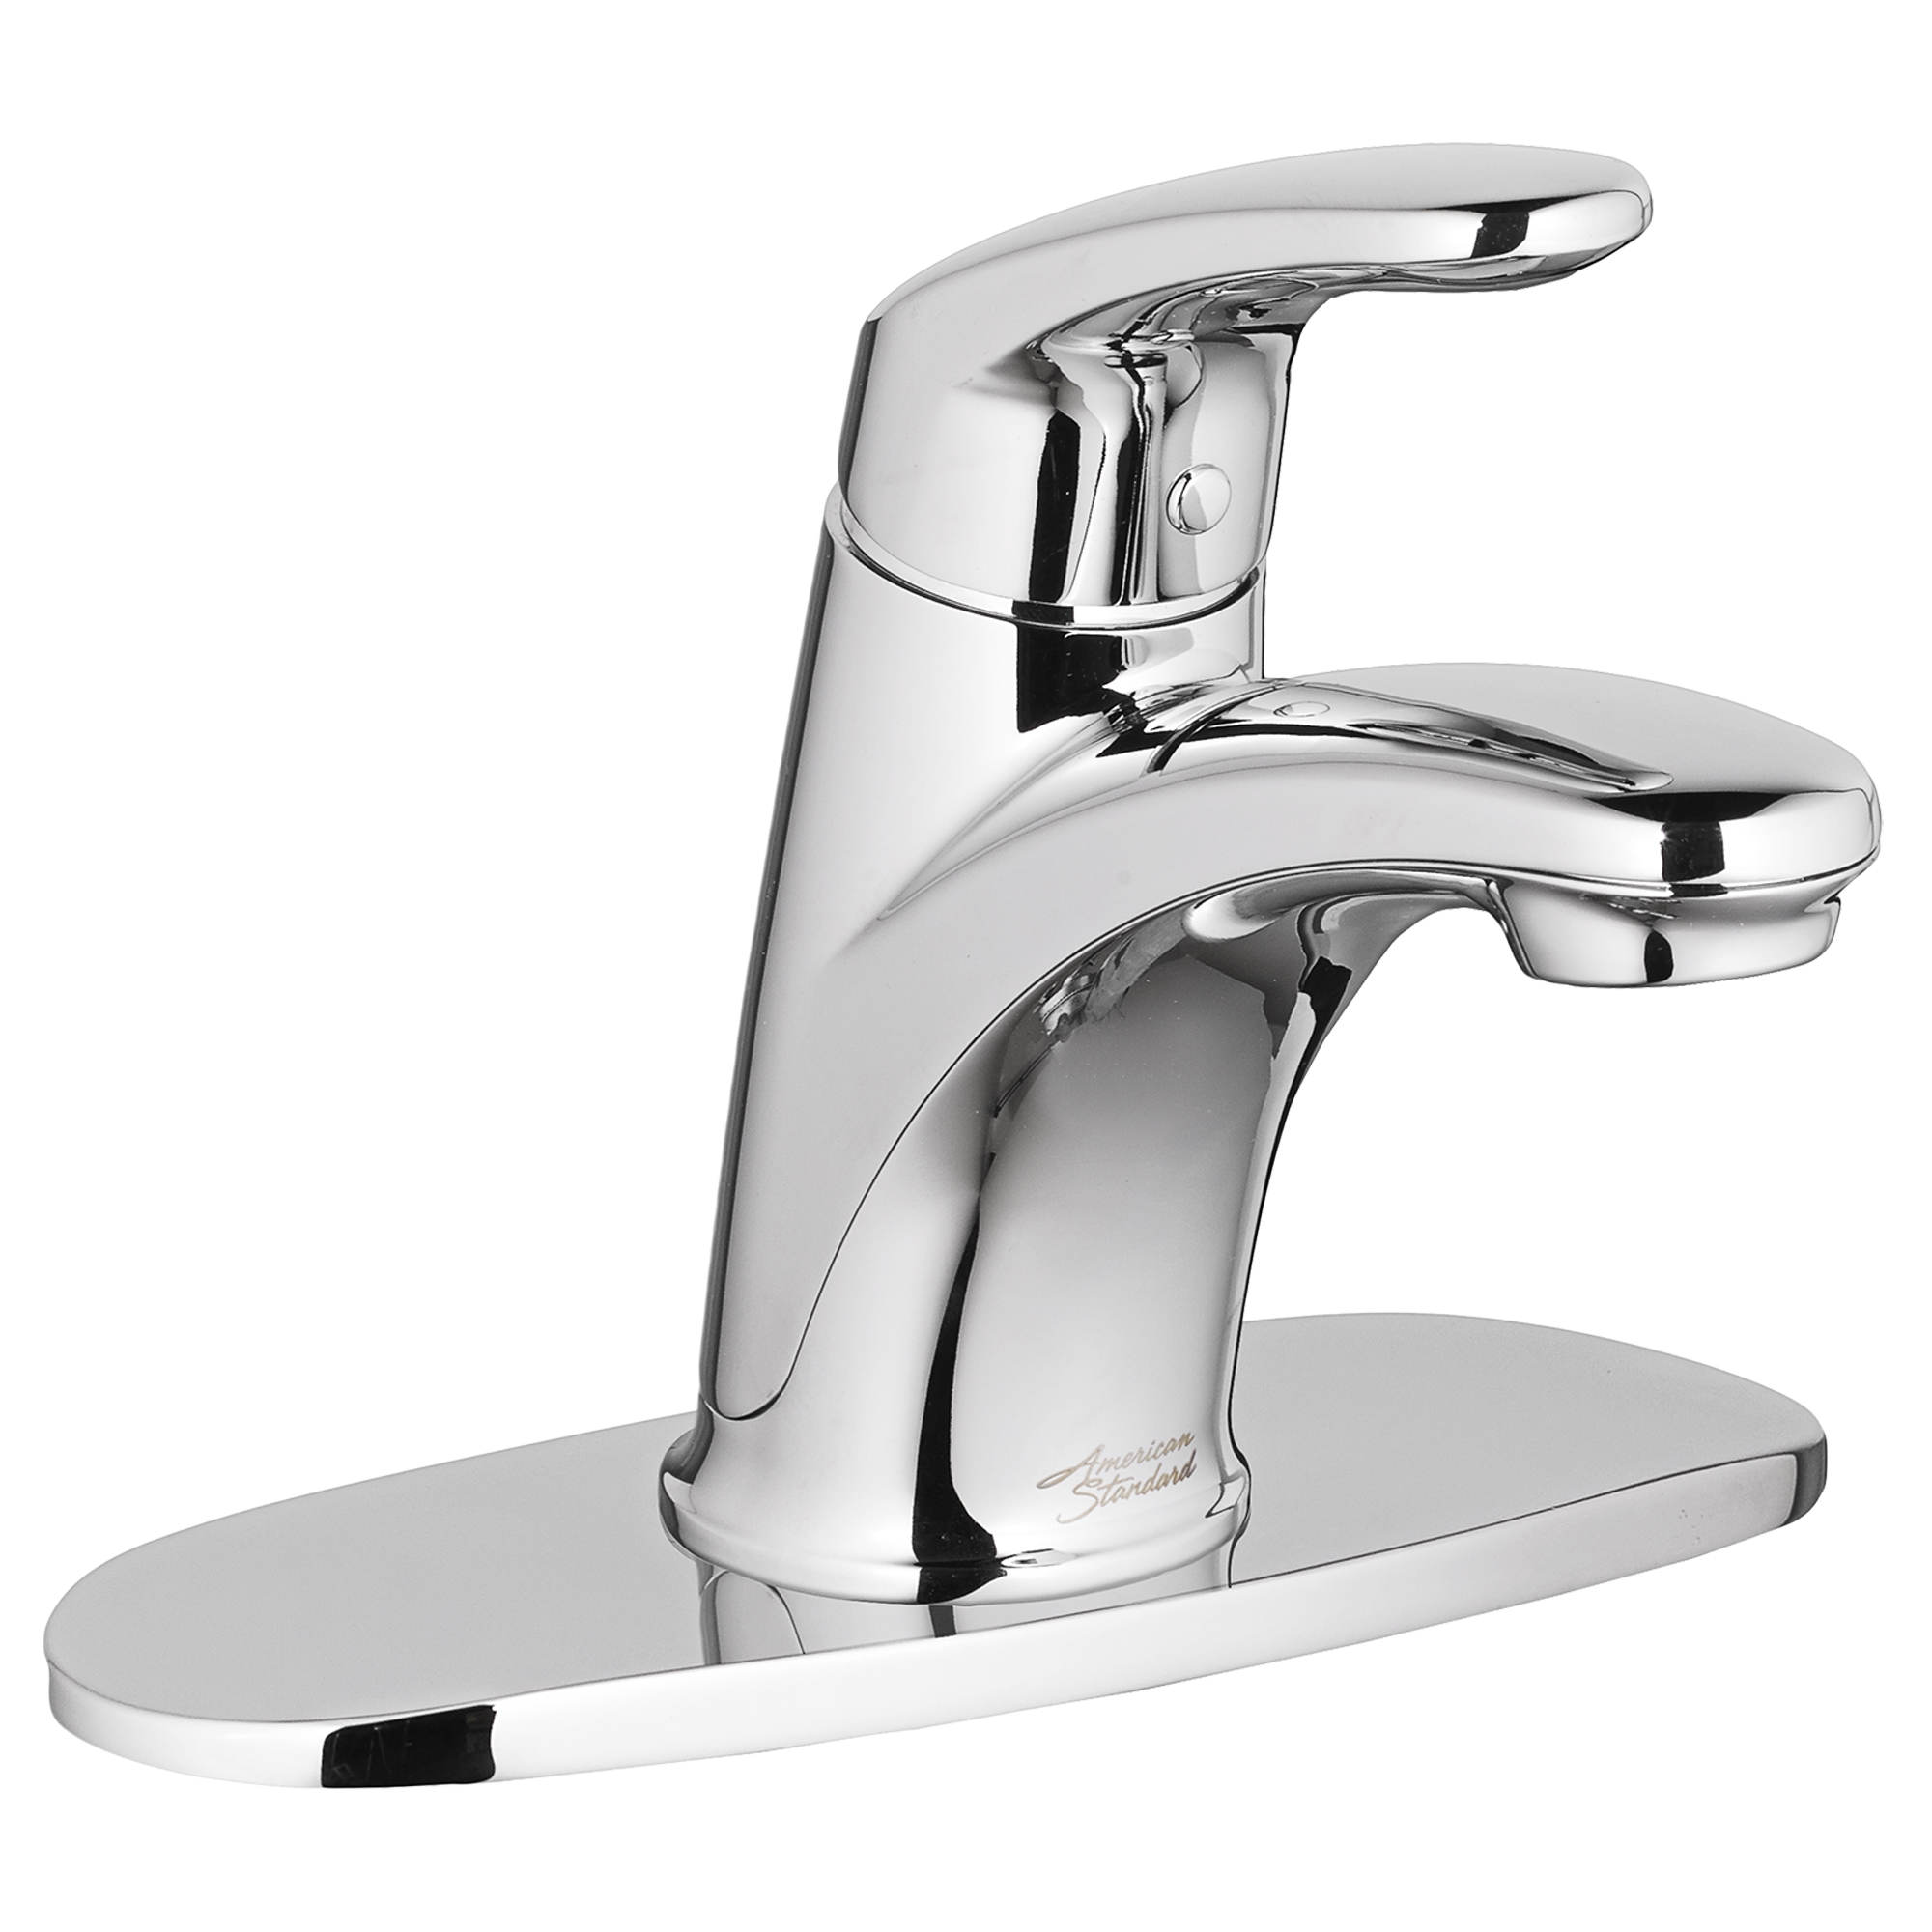 Colony™ PRO Single Hole Single-Handle Bathroom Faucet 1.2 gpm/4.5 L/min With Lever Handle